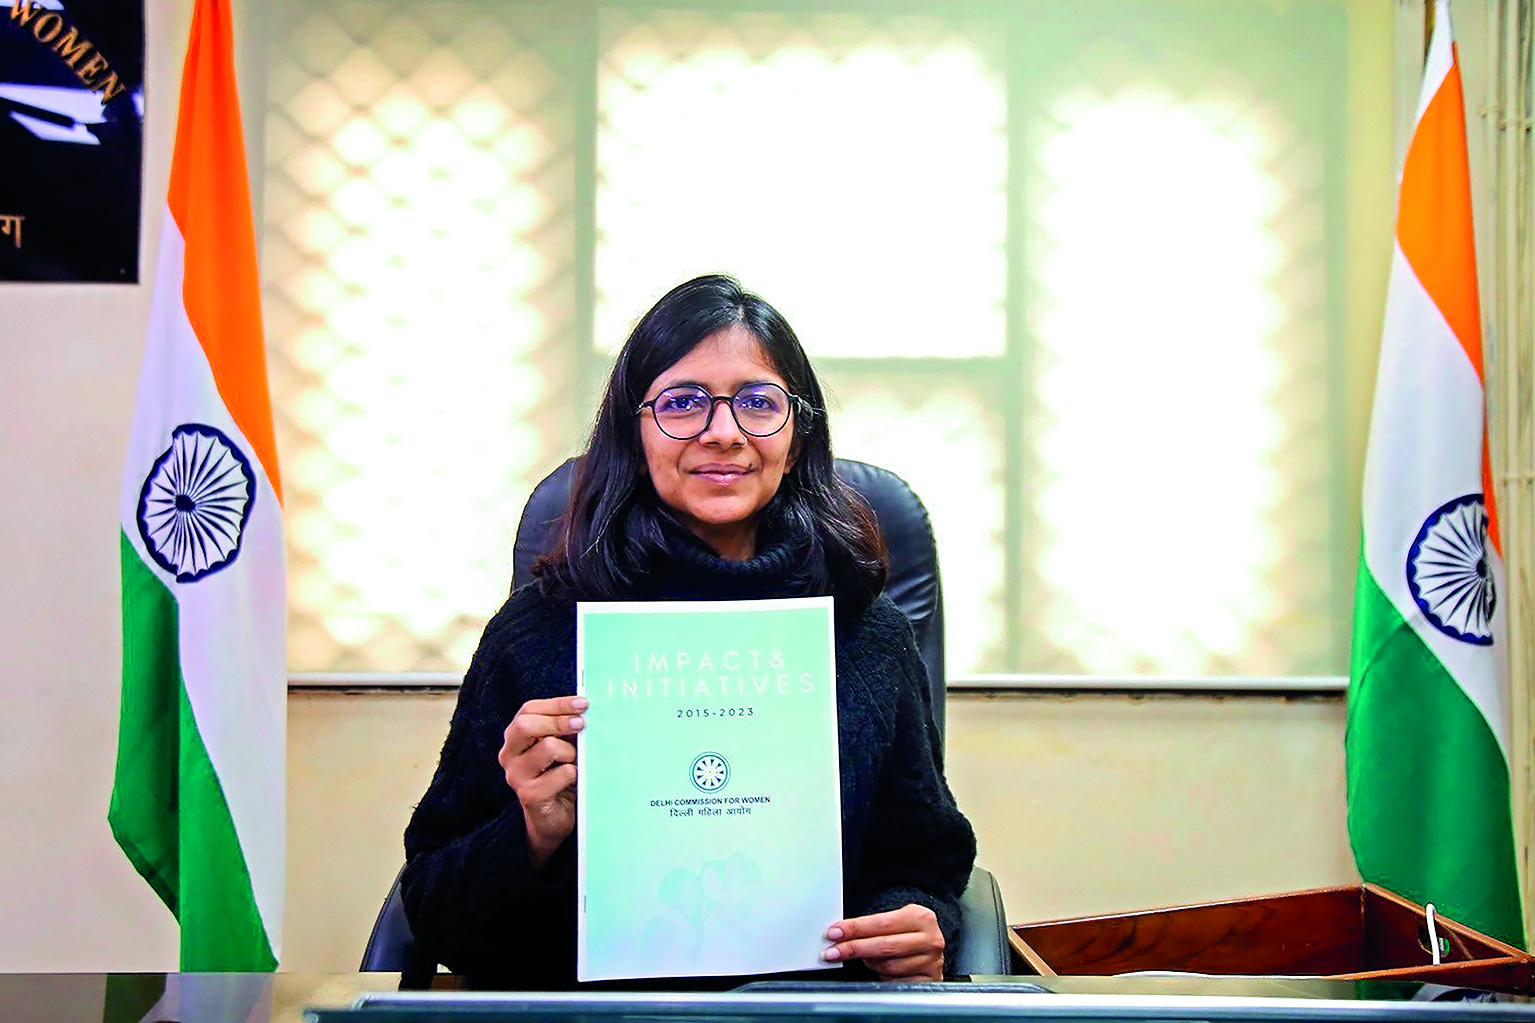 Delhi Commission for Women highlights transformative efforts under leadership of chairperson Swati Maliwal